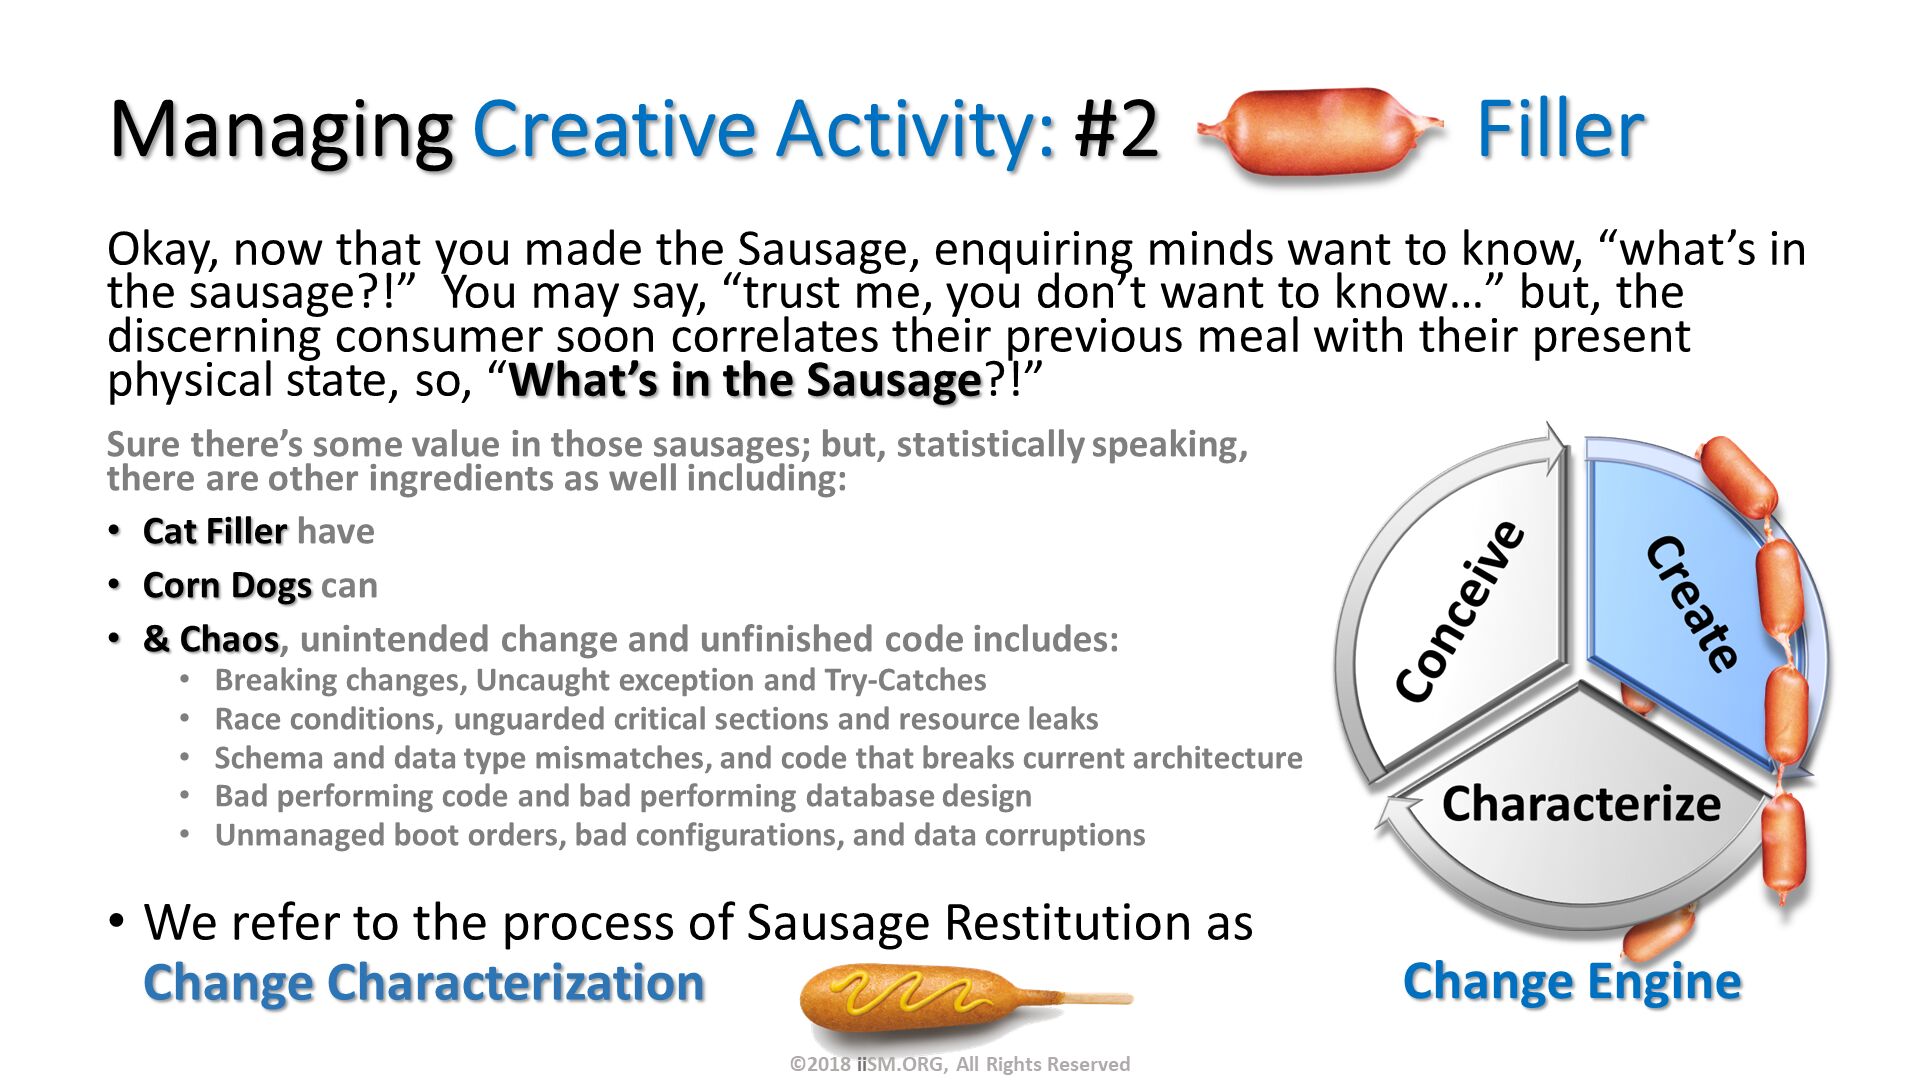 Managing Creative Activity: #2                Filler. Okay, now that you made the Sausage, enquiring minds want to know, “what’s in the sausage?!”  You may say, “trust me, you don’t want to know…” but, the discerning consumer soon correlates their previous meal with their present physical state, so, “What’s in the Sausage?!”. We refer to the process of Sausage Restitution as Change Characterization 
. Change Engine . Sure there’s some value in those sausages; but, statistically speaking, there are other ingredients as well including:
Cat Filler have 
Corn Dogs can
& Chaos, unintended change and unfinished code includes:
Breaking changes, Uncaught exception and Try-Catches
Race conditions, unguarded critical sections and resource leaks
Schema and data type mismatches, and code that breaks current architecture
Bad performing code and bad performing database design
Unmanaged boot orders, bad configurations, and data corruptions. ©2018 iiSM.ORG, All Rights Reserved. 